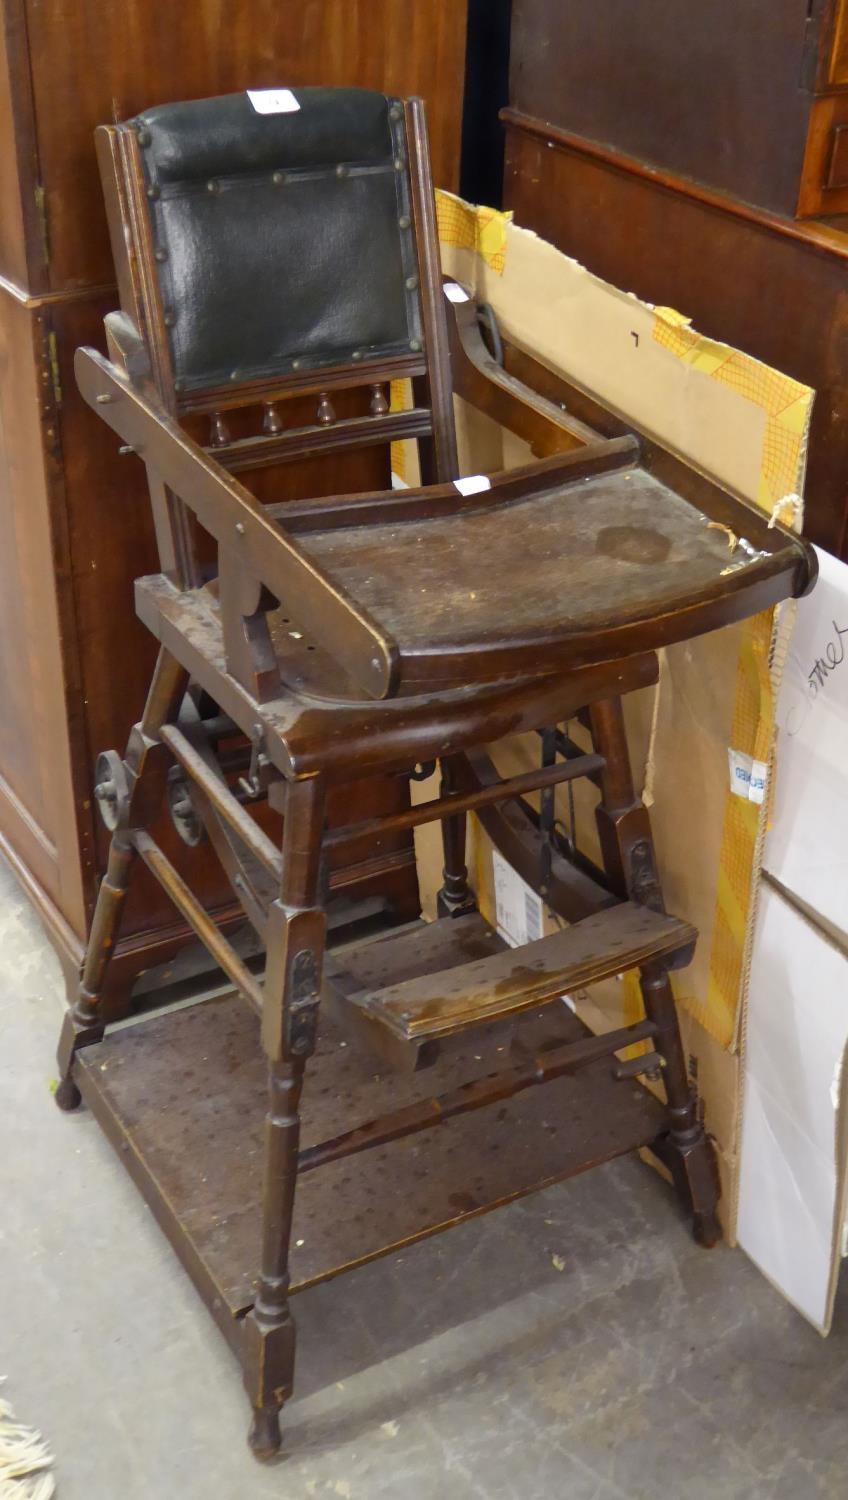 LATE VICTORIAN METAMORPHIC HIGHCHAIR WITH CAST METAL WHEELS - Image 2 of 2